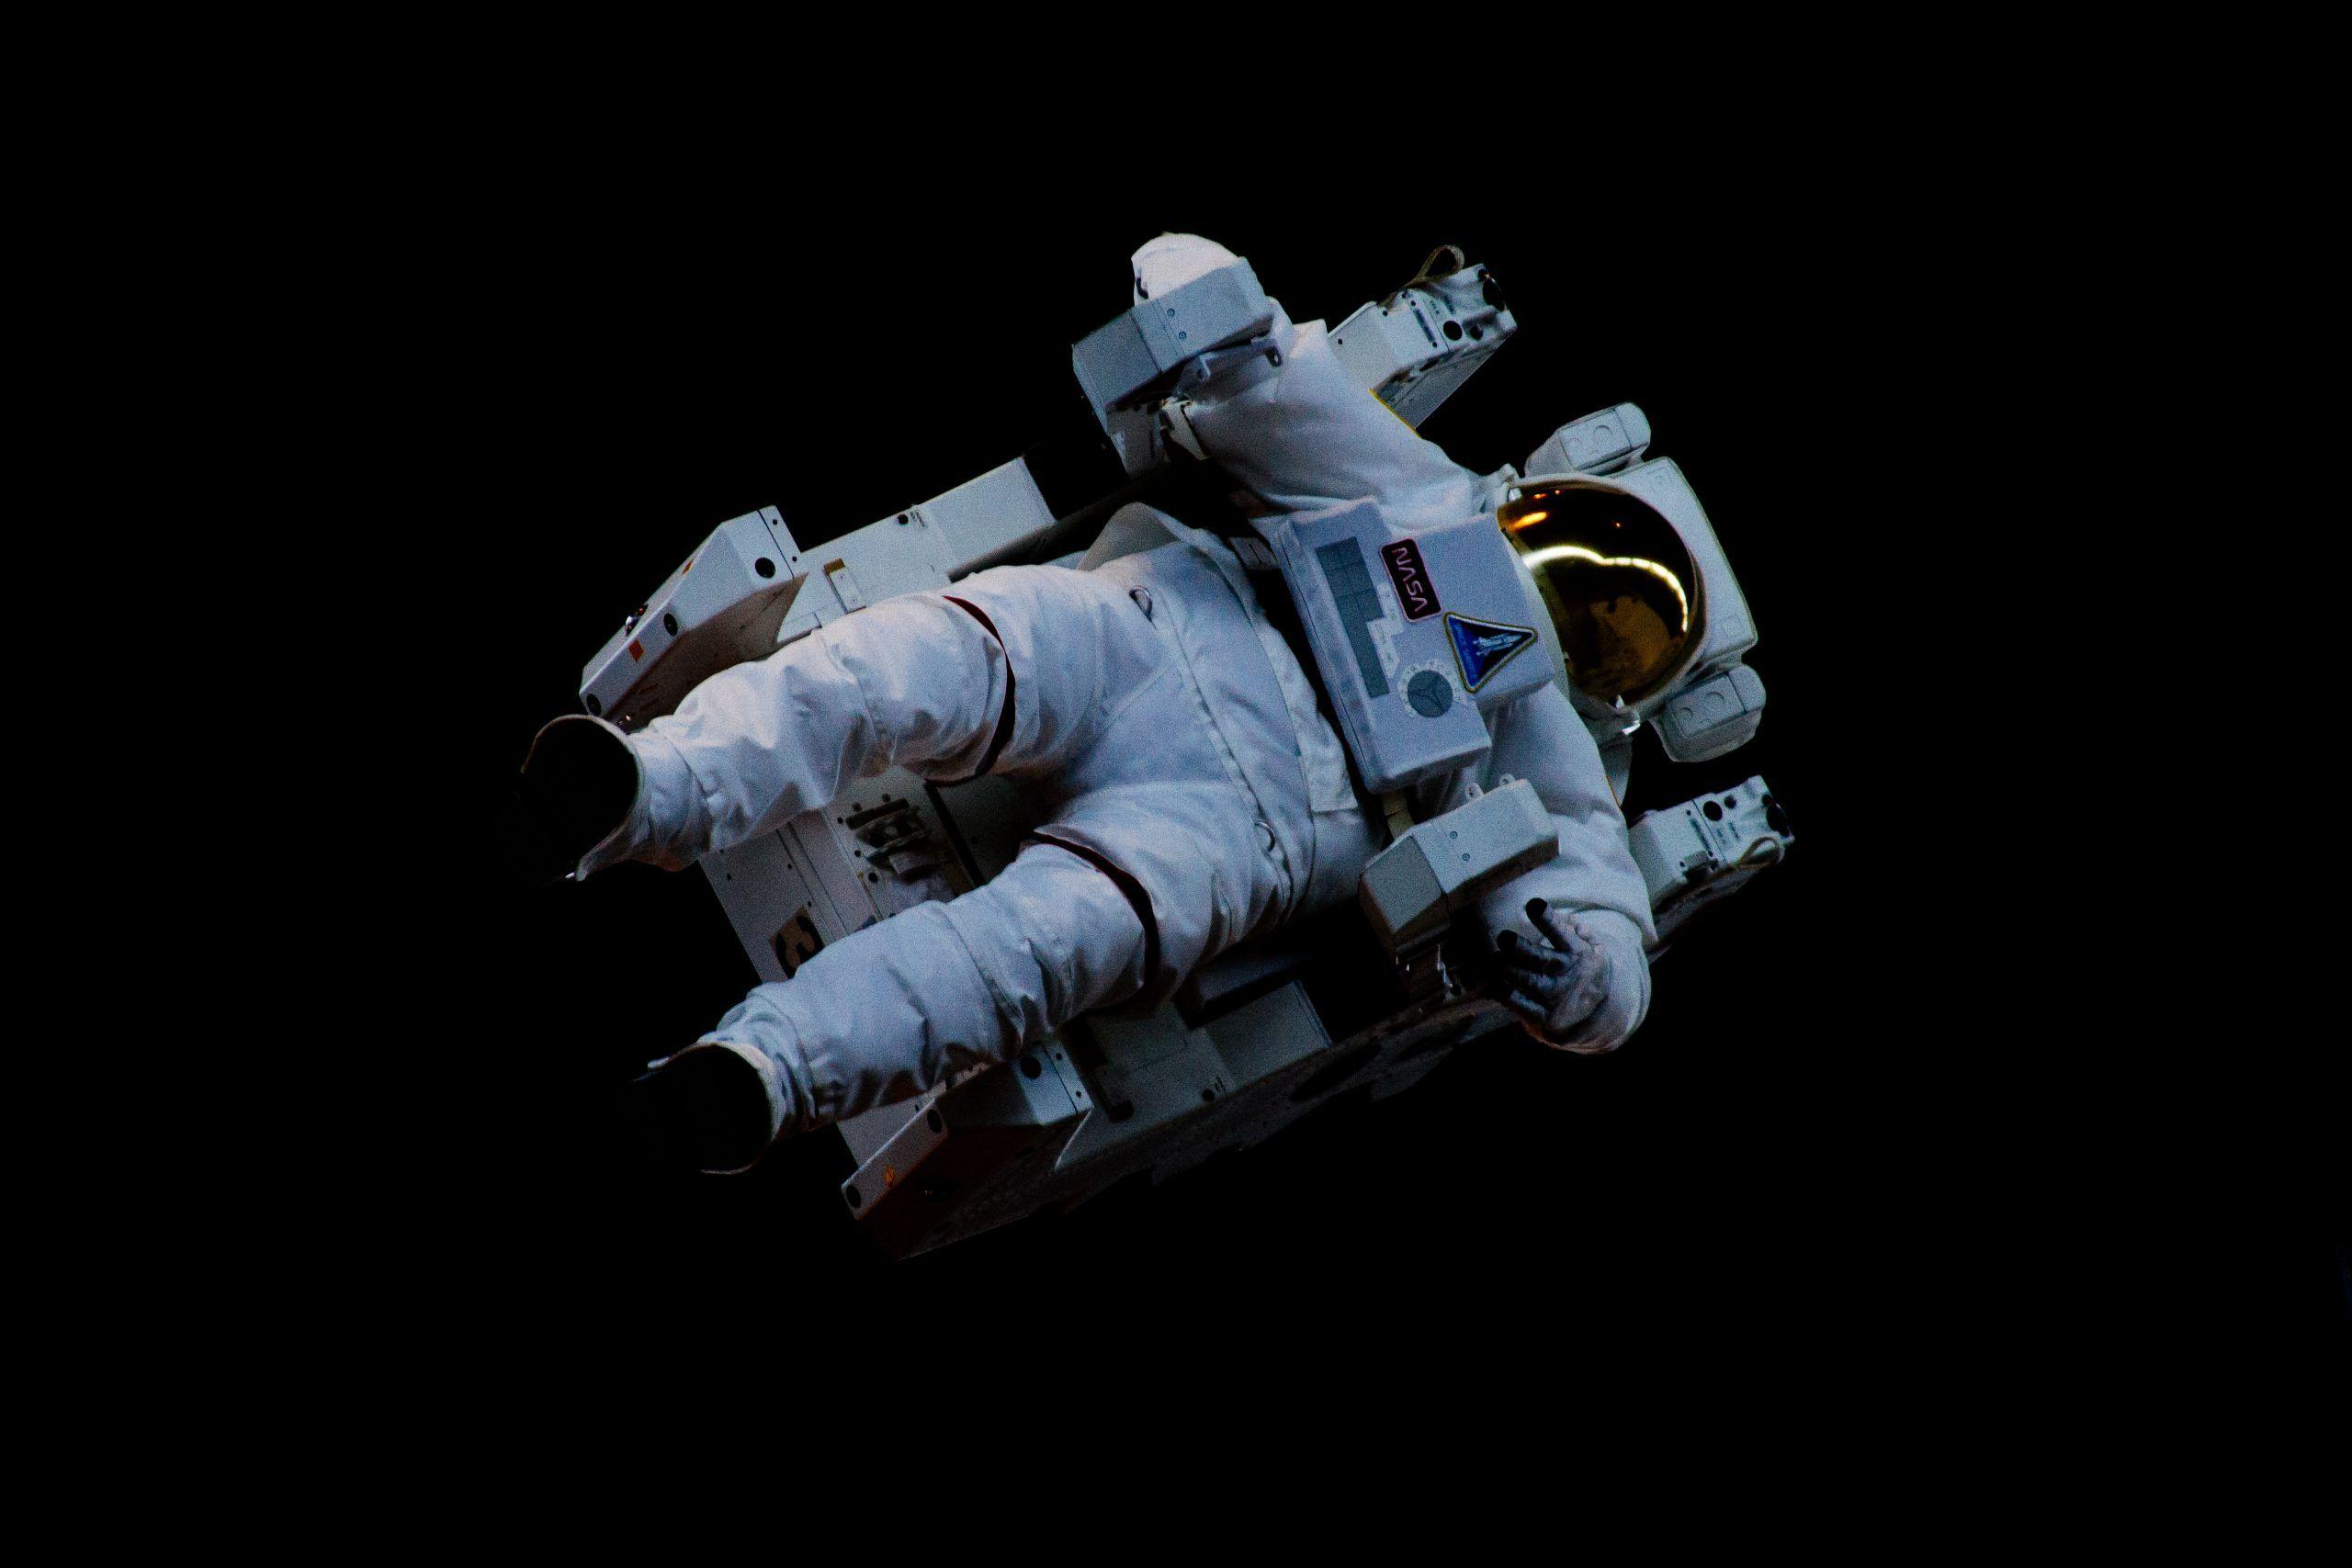 Floating Astronaut Wallpapers - Top Free Floating Astronaut Backgrounds